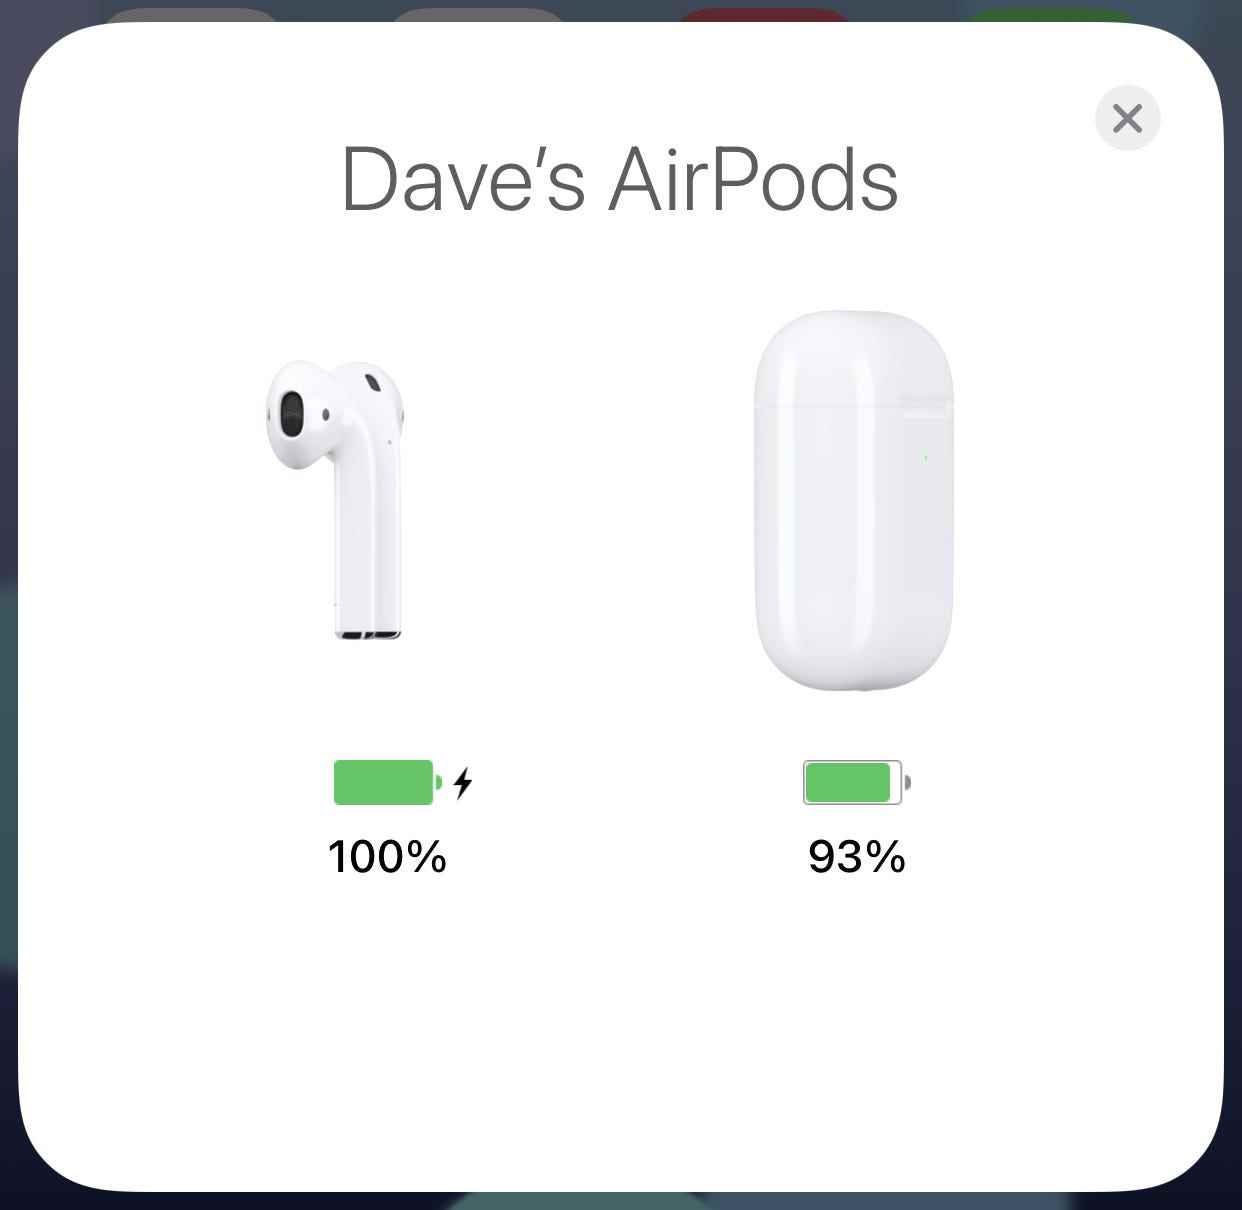 AirPods laden